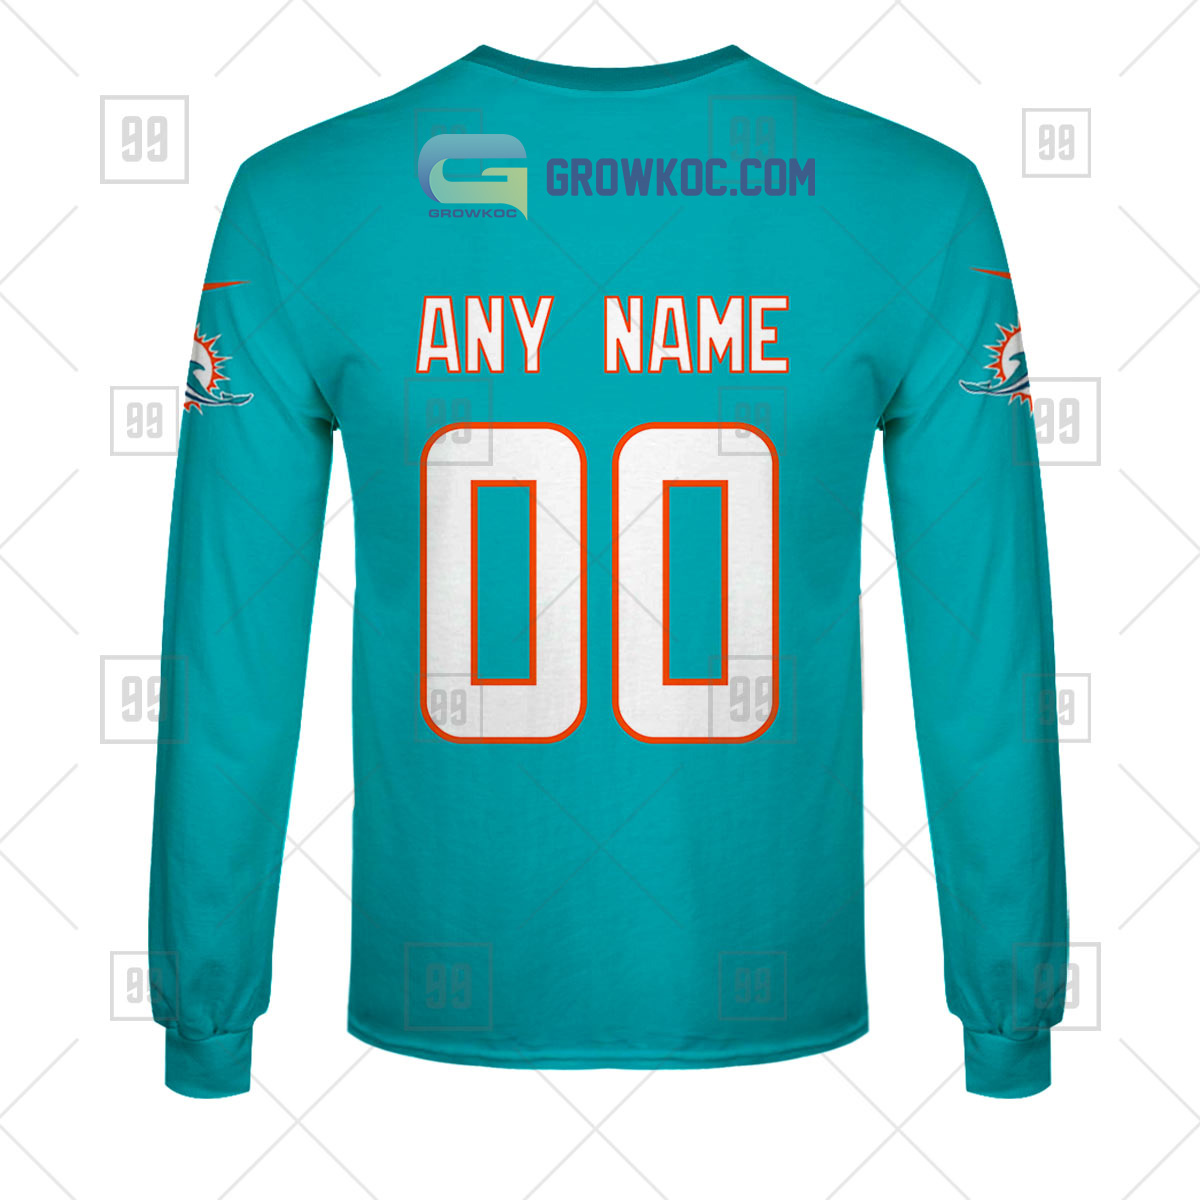 Dolphins jersey personalization